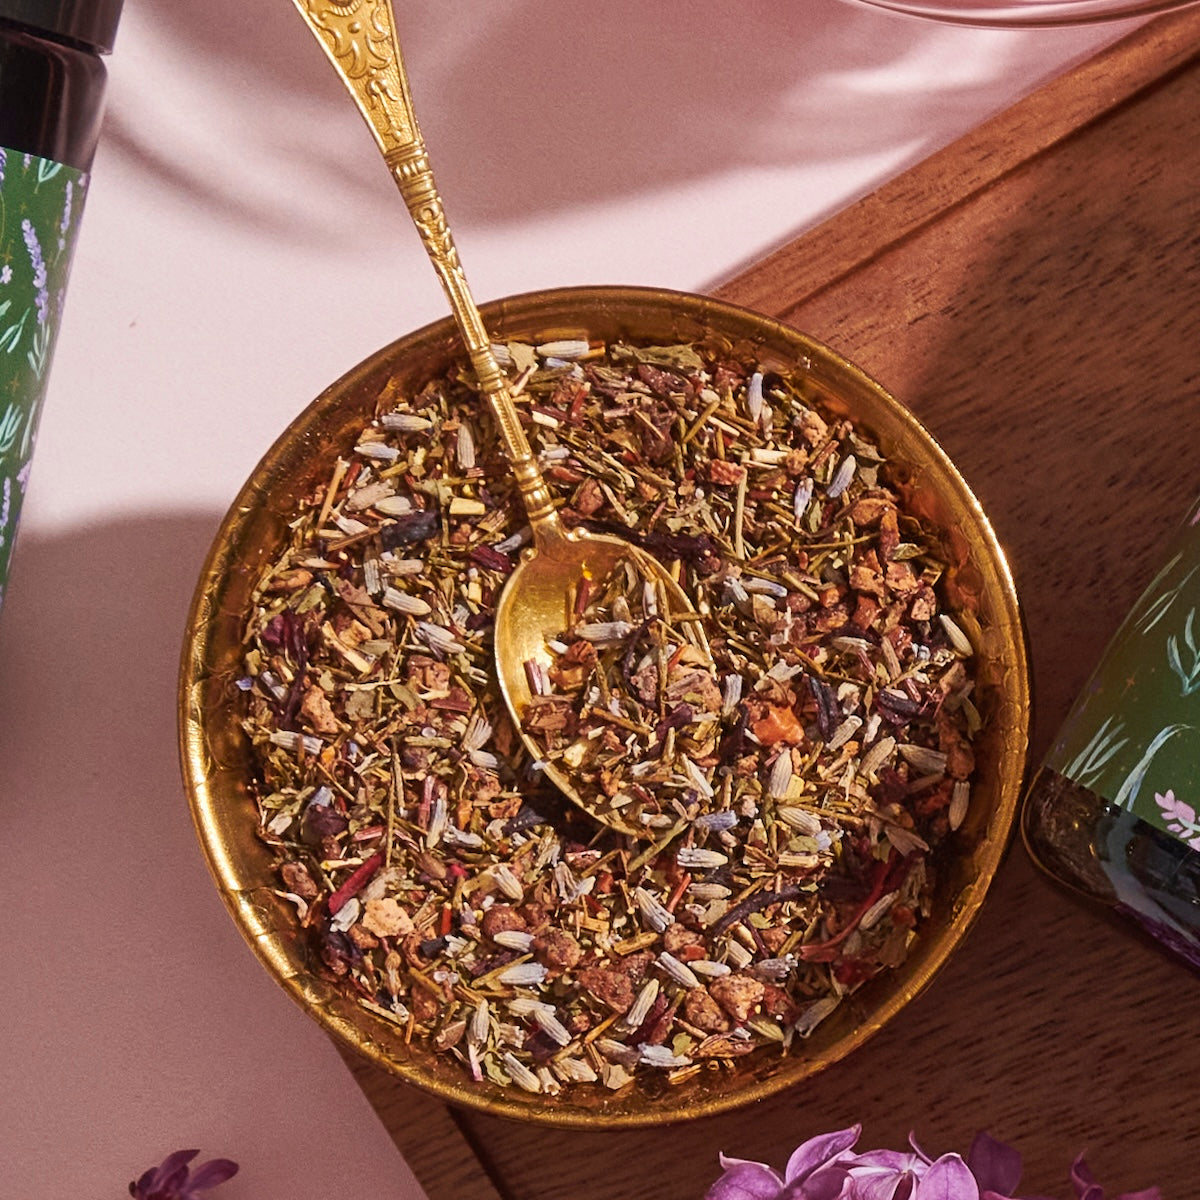 A brass bowl filled with a colorful mixture of dried herbs and spices, reminiscent of loose leaf tea, is accompanied by an ornate brass spoon. The bowl is set on a wooden surface with a bottle of Magic Hour&#39;s Blueberry Lavender Mint: Cosmic Garden Iced Tea featuring floral designs partially visible to the left.